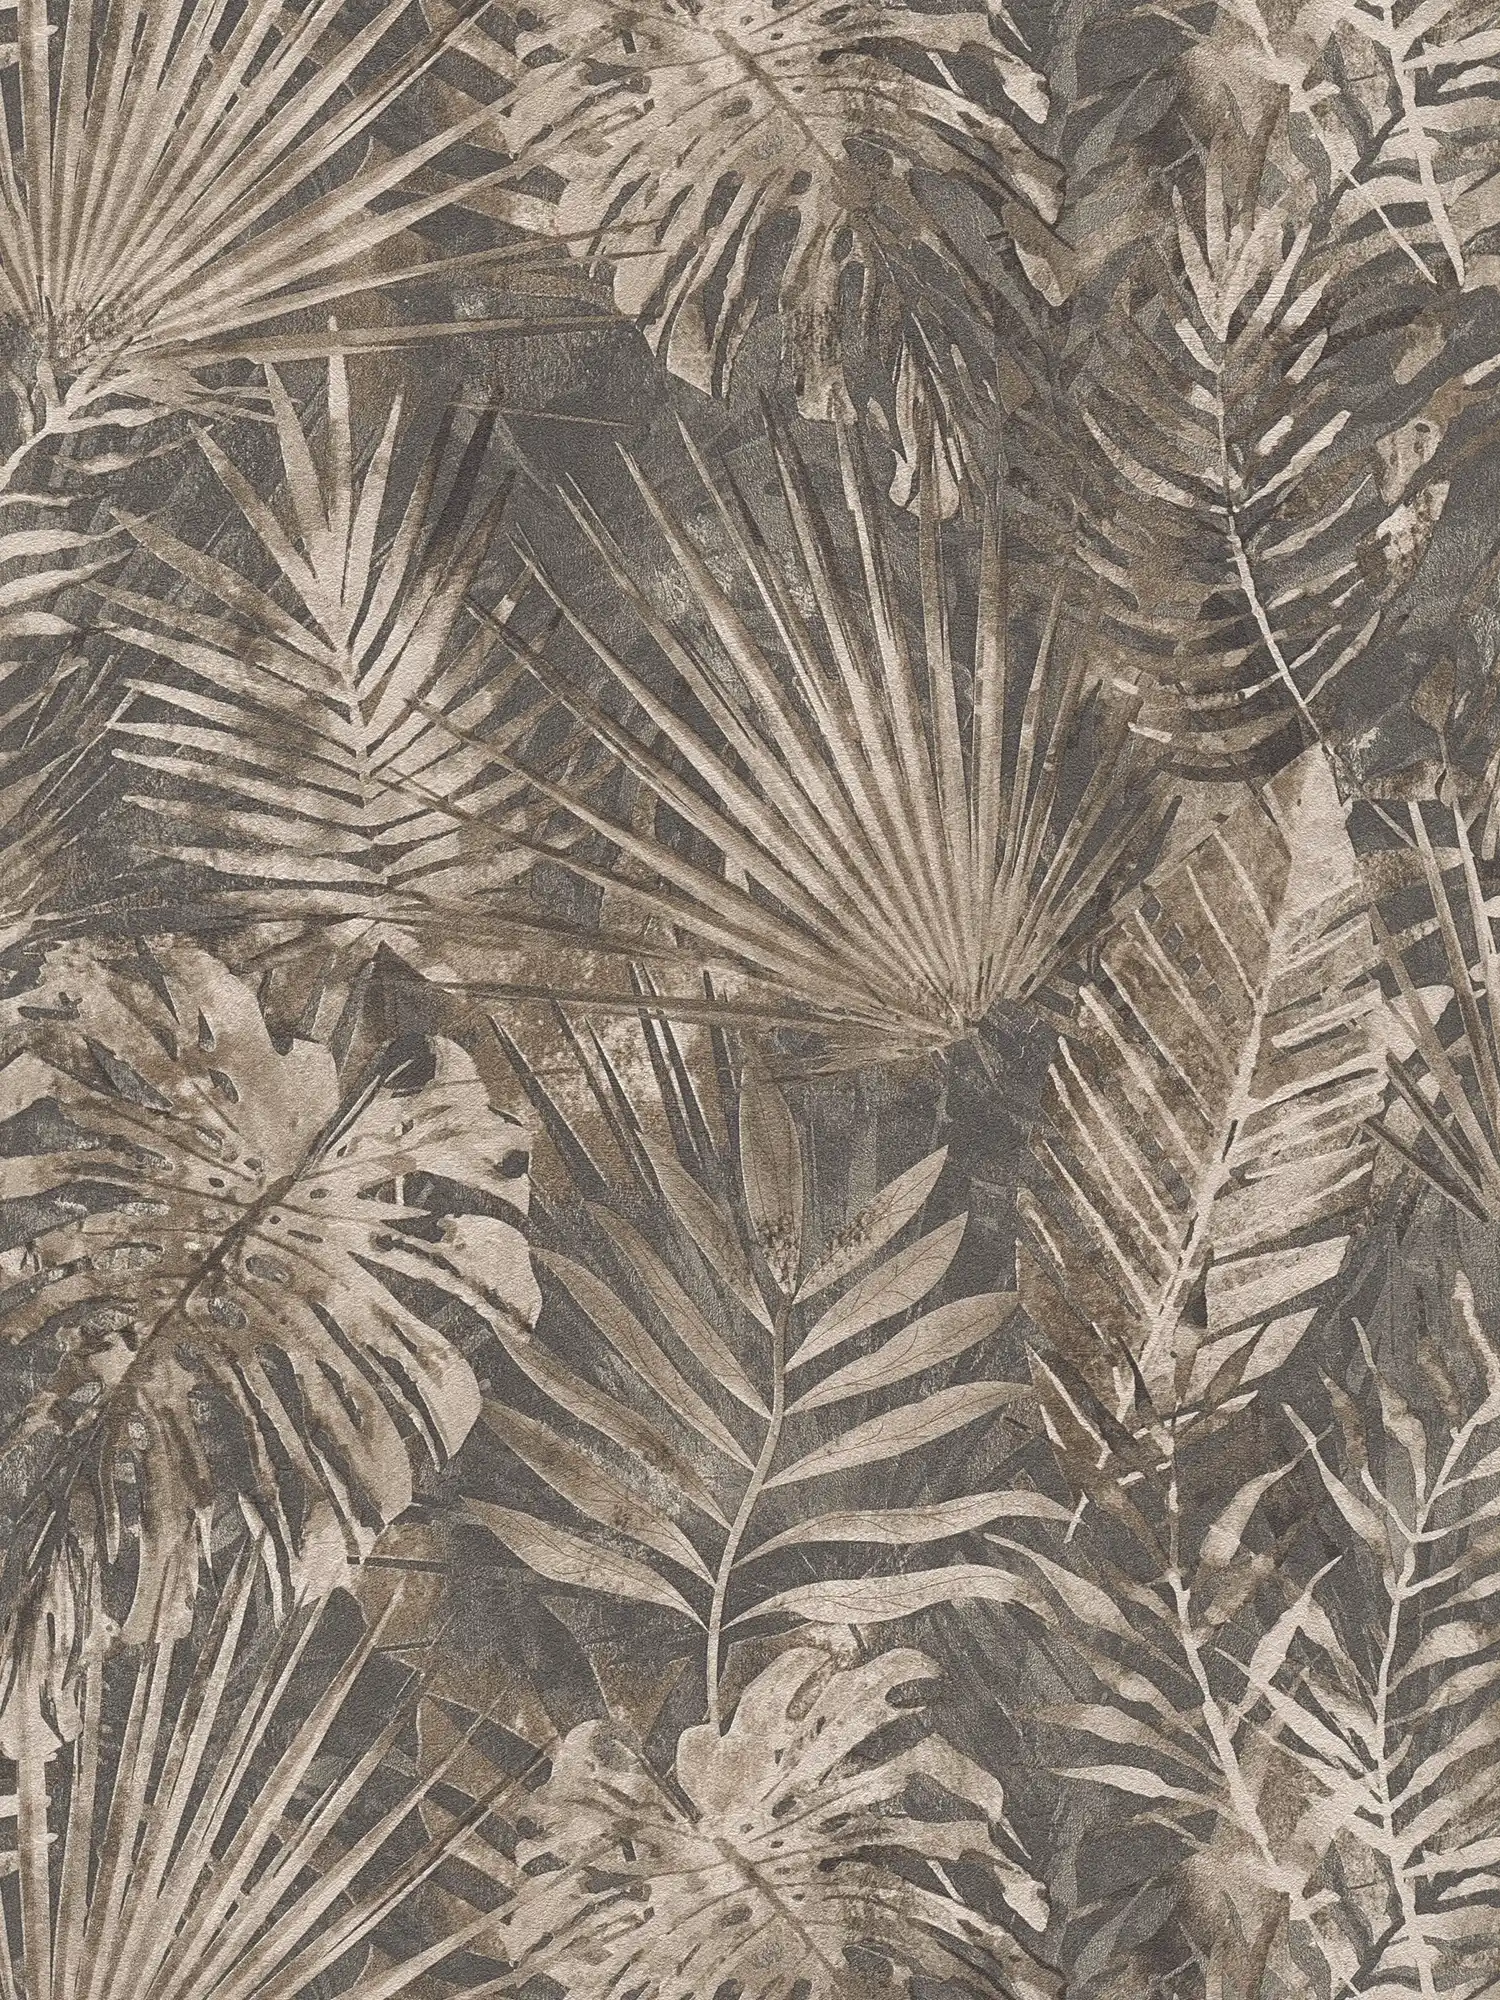 Jungle wallpaper with tropical leaf pattern PVC-free - brown, beige, anthracite
